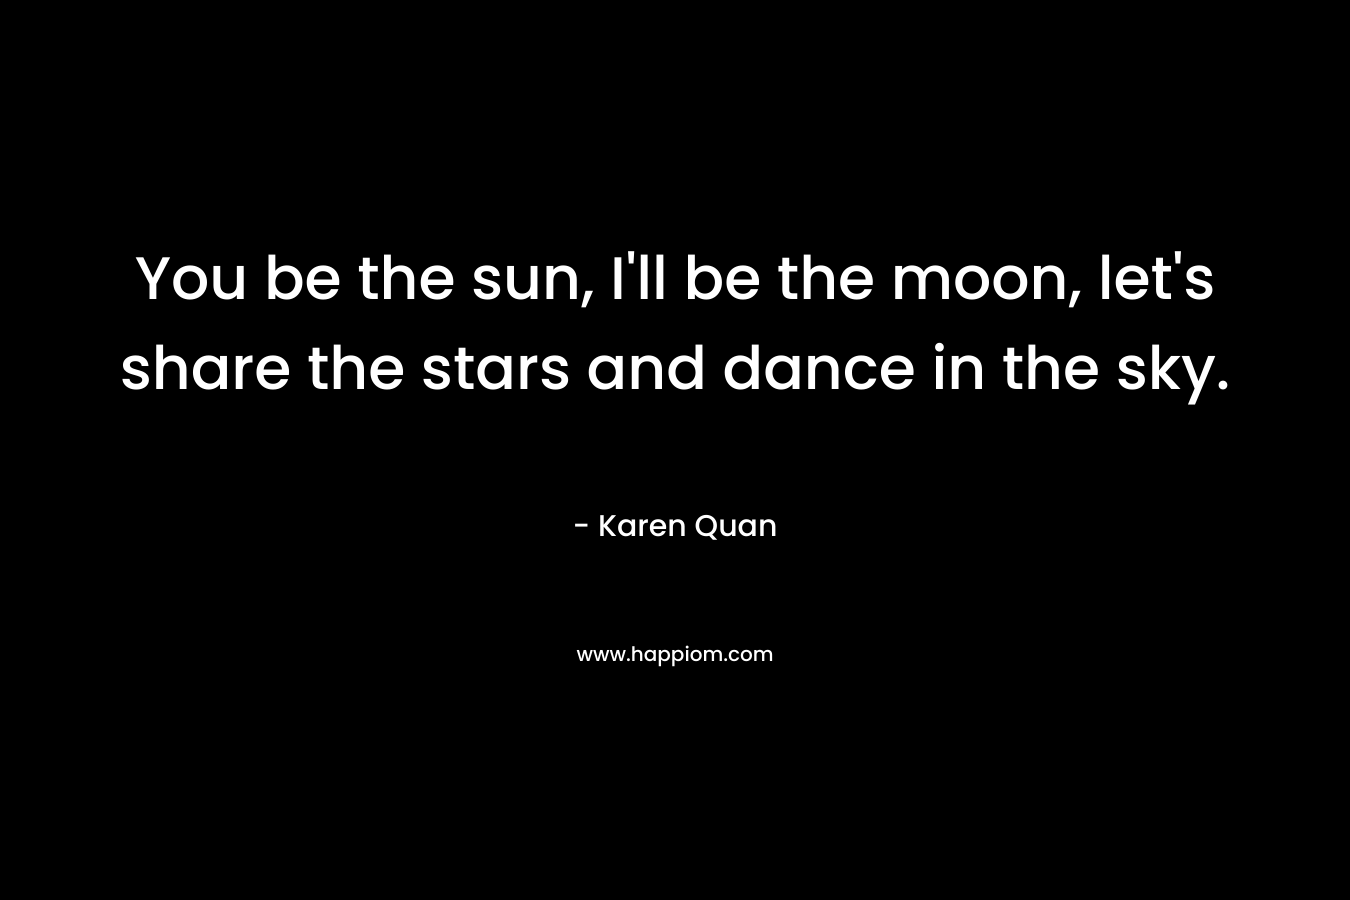 You be the sun, I'll be the moon, let's share the stars and dance in the sky.